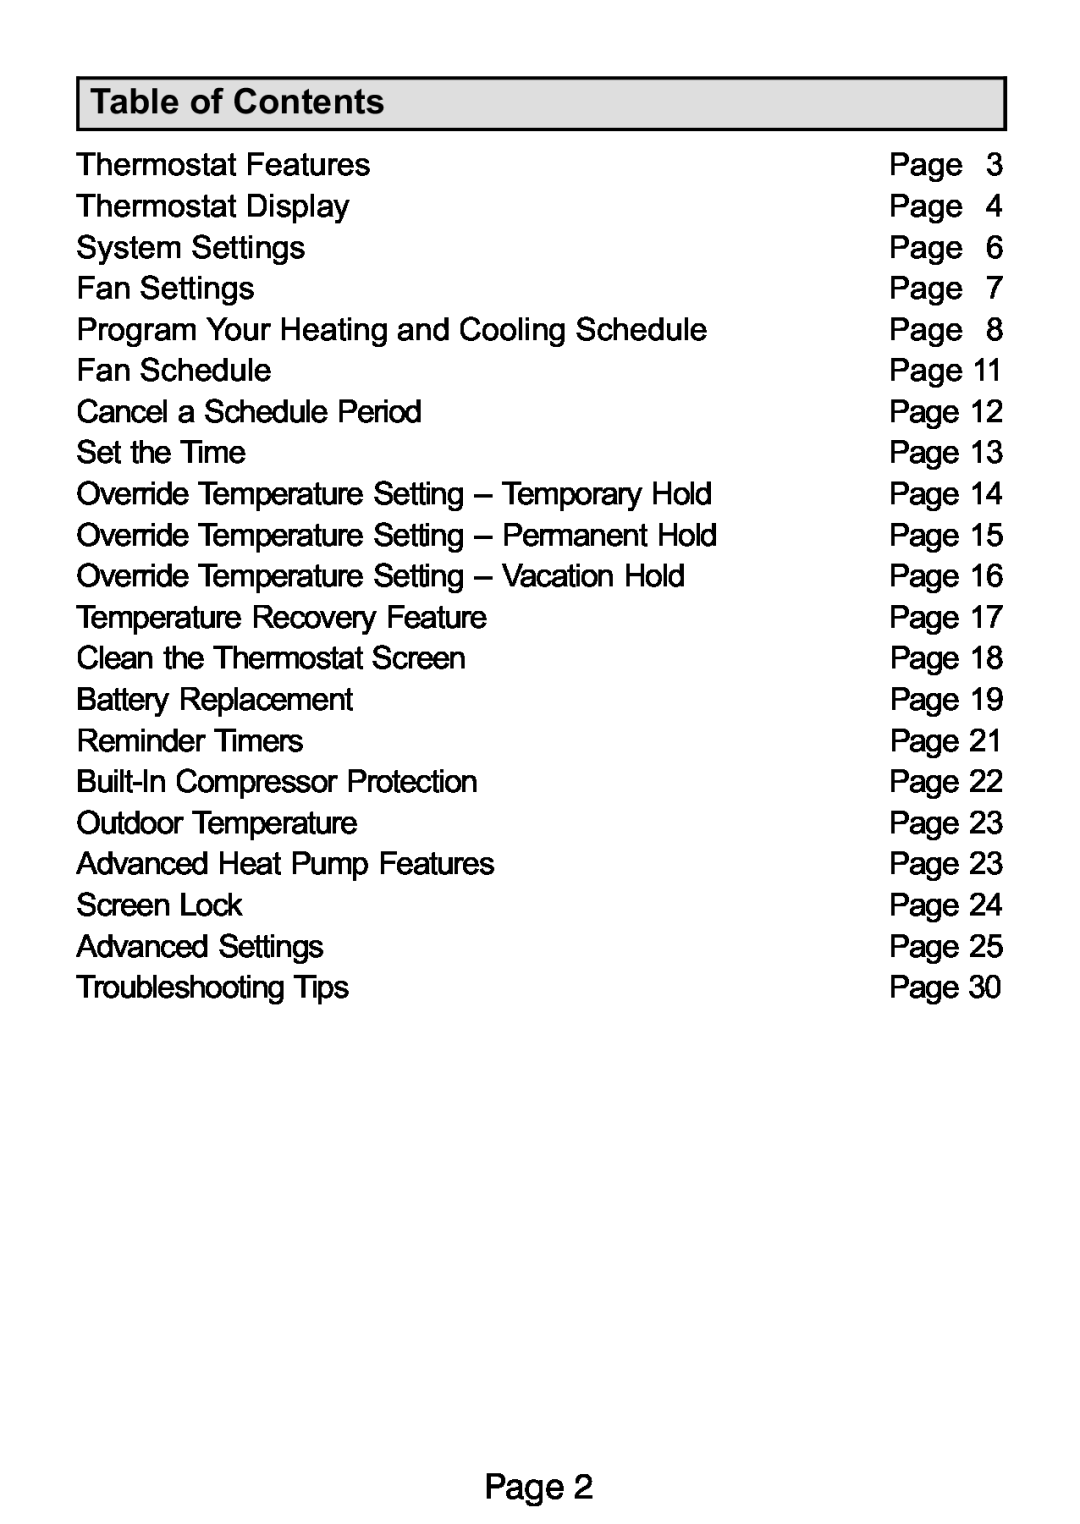 Lennox International Inc Ellite Series manual Table of Contents, Page 